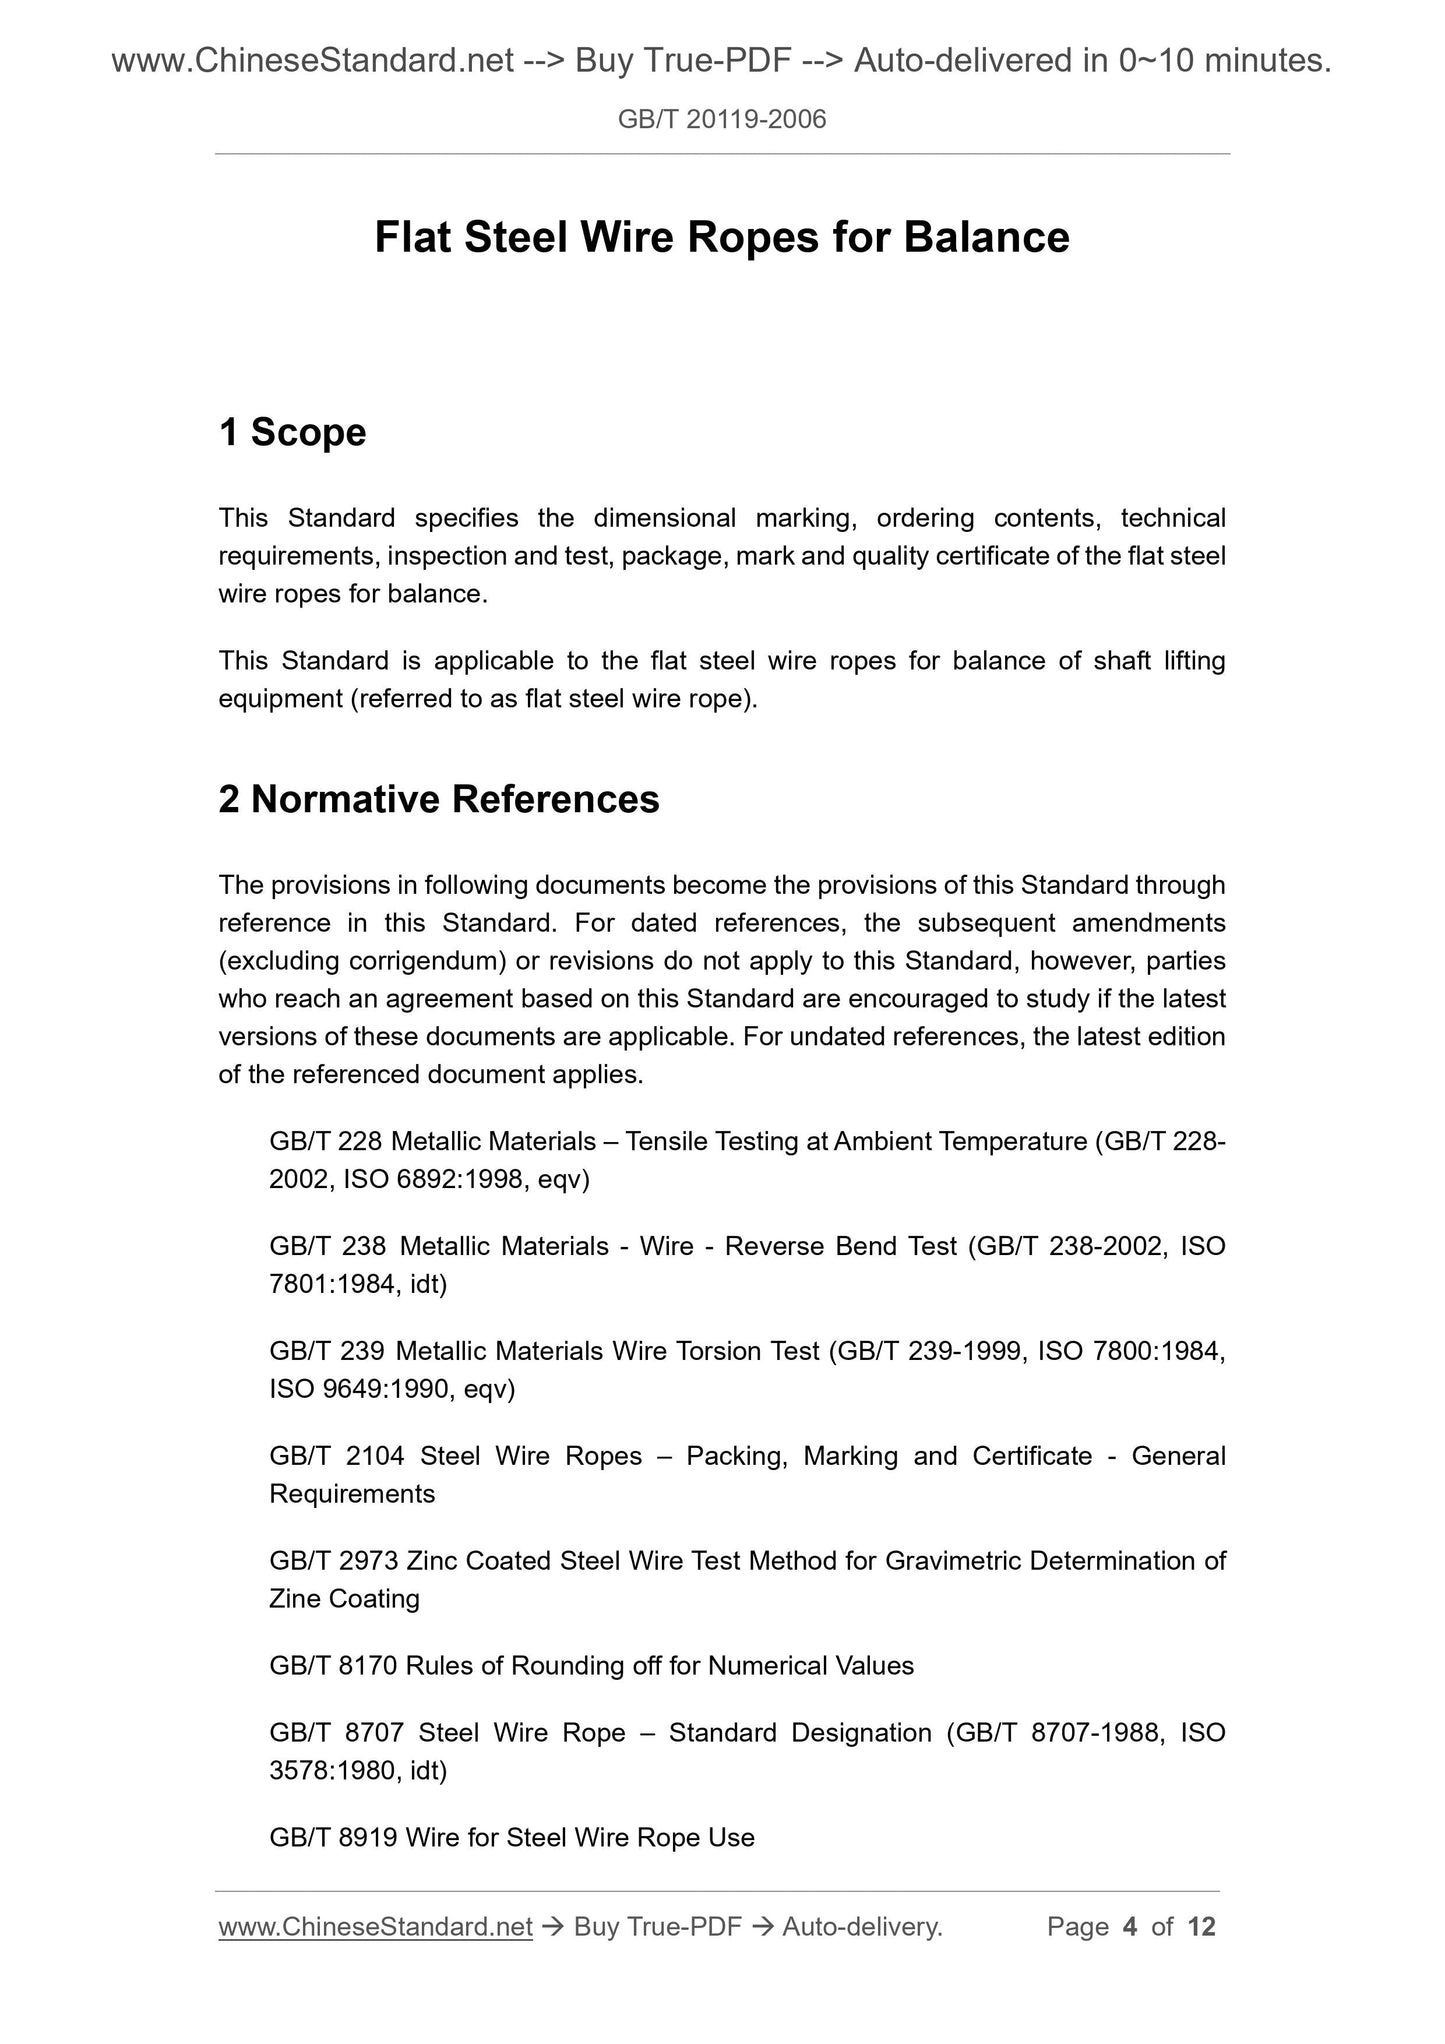 GB/T 20119-2006 Page 3